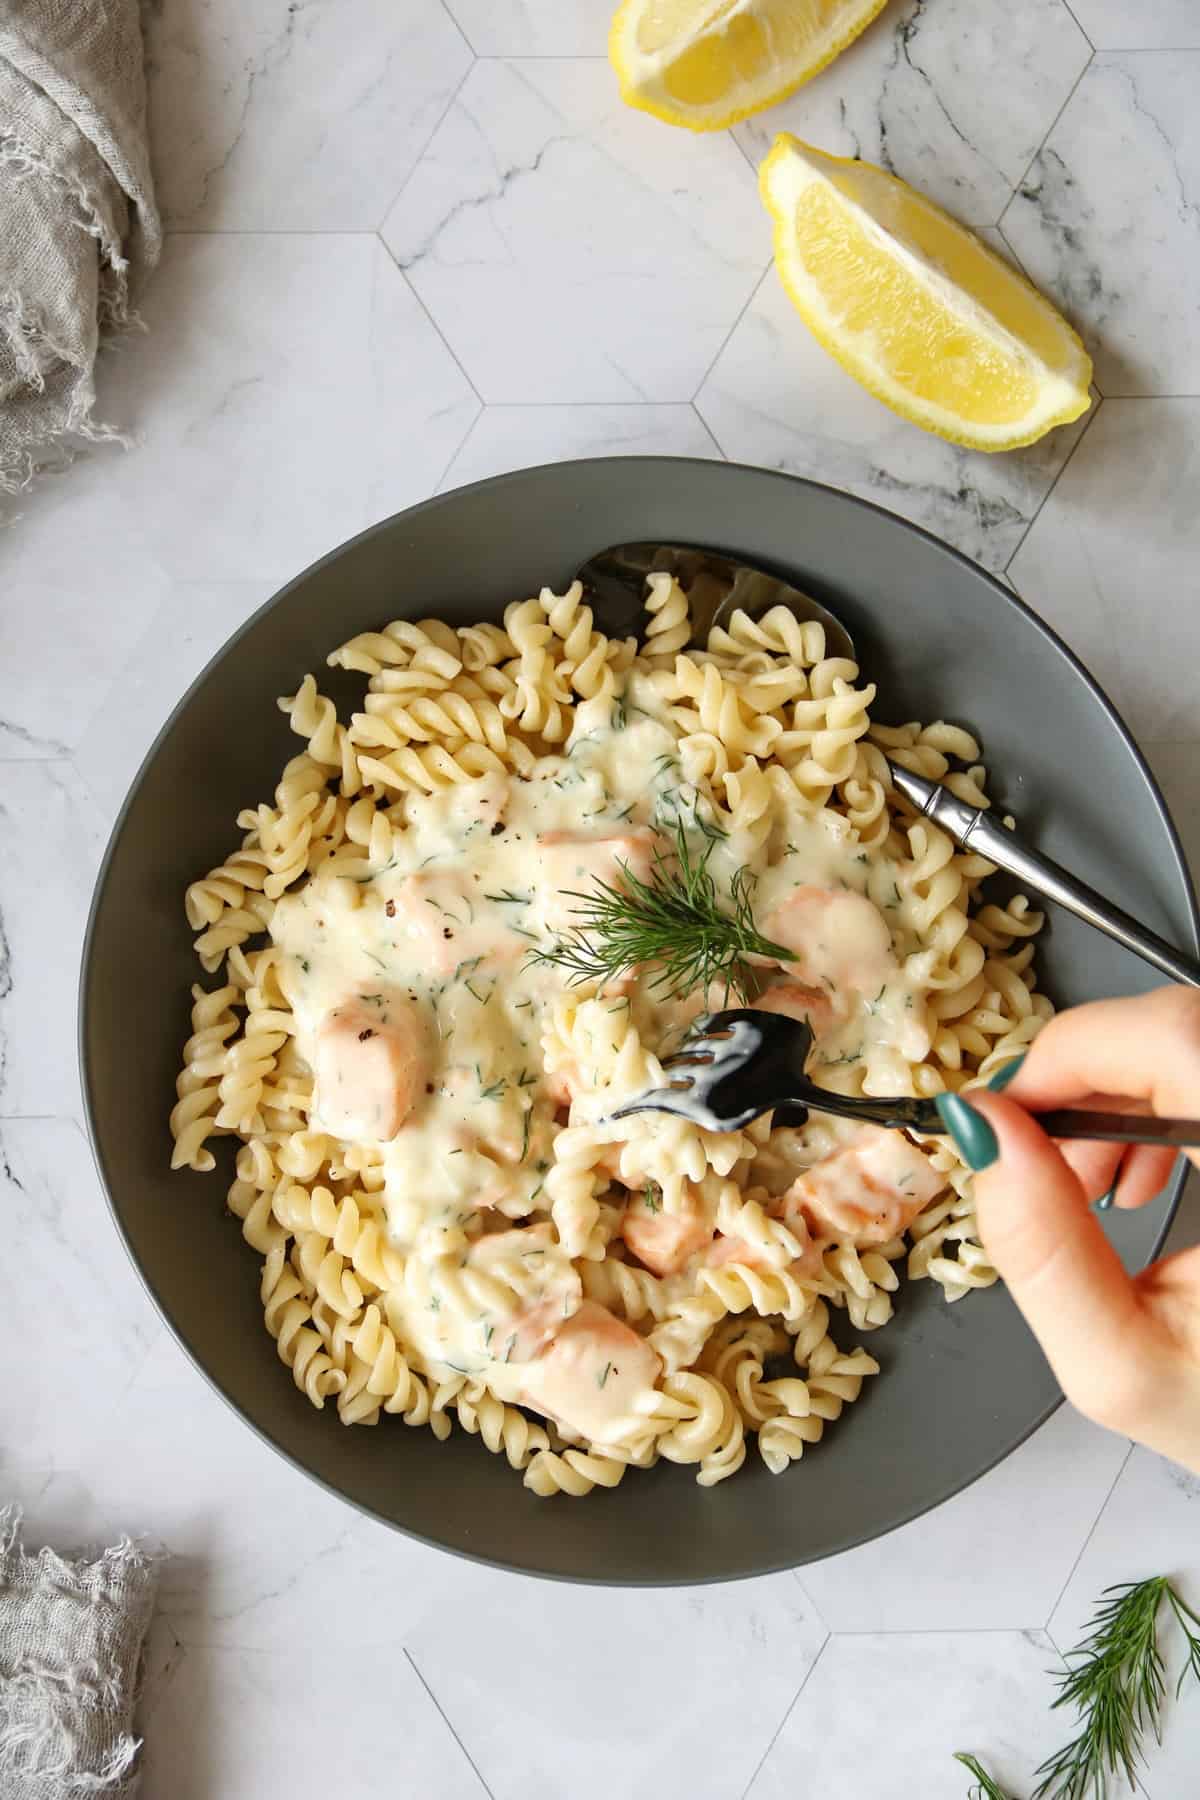 A hand takes a portion of pasta in salmon cream sauce from a plate with the dish.